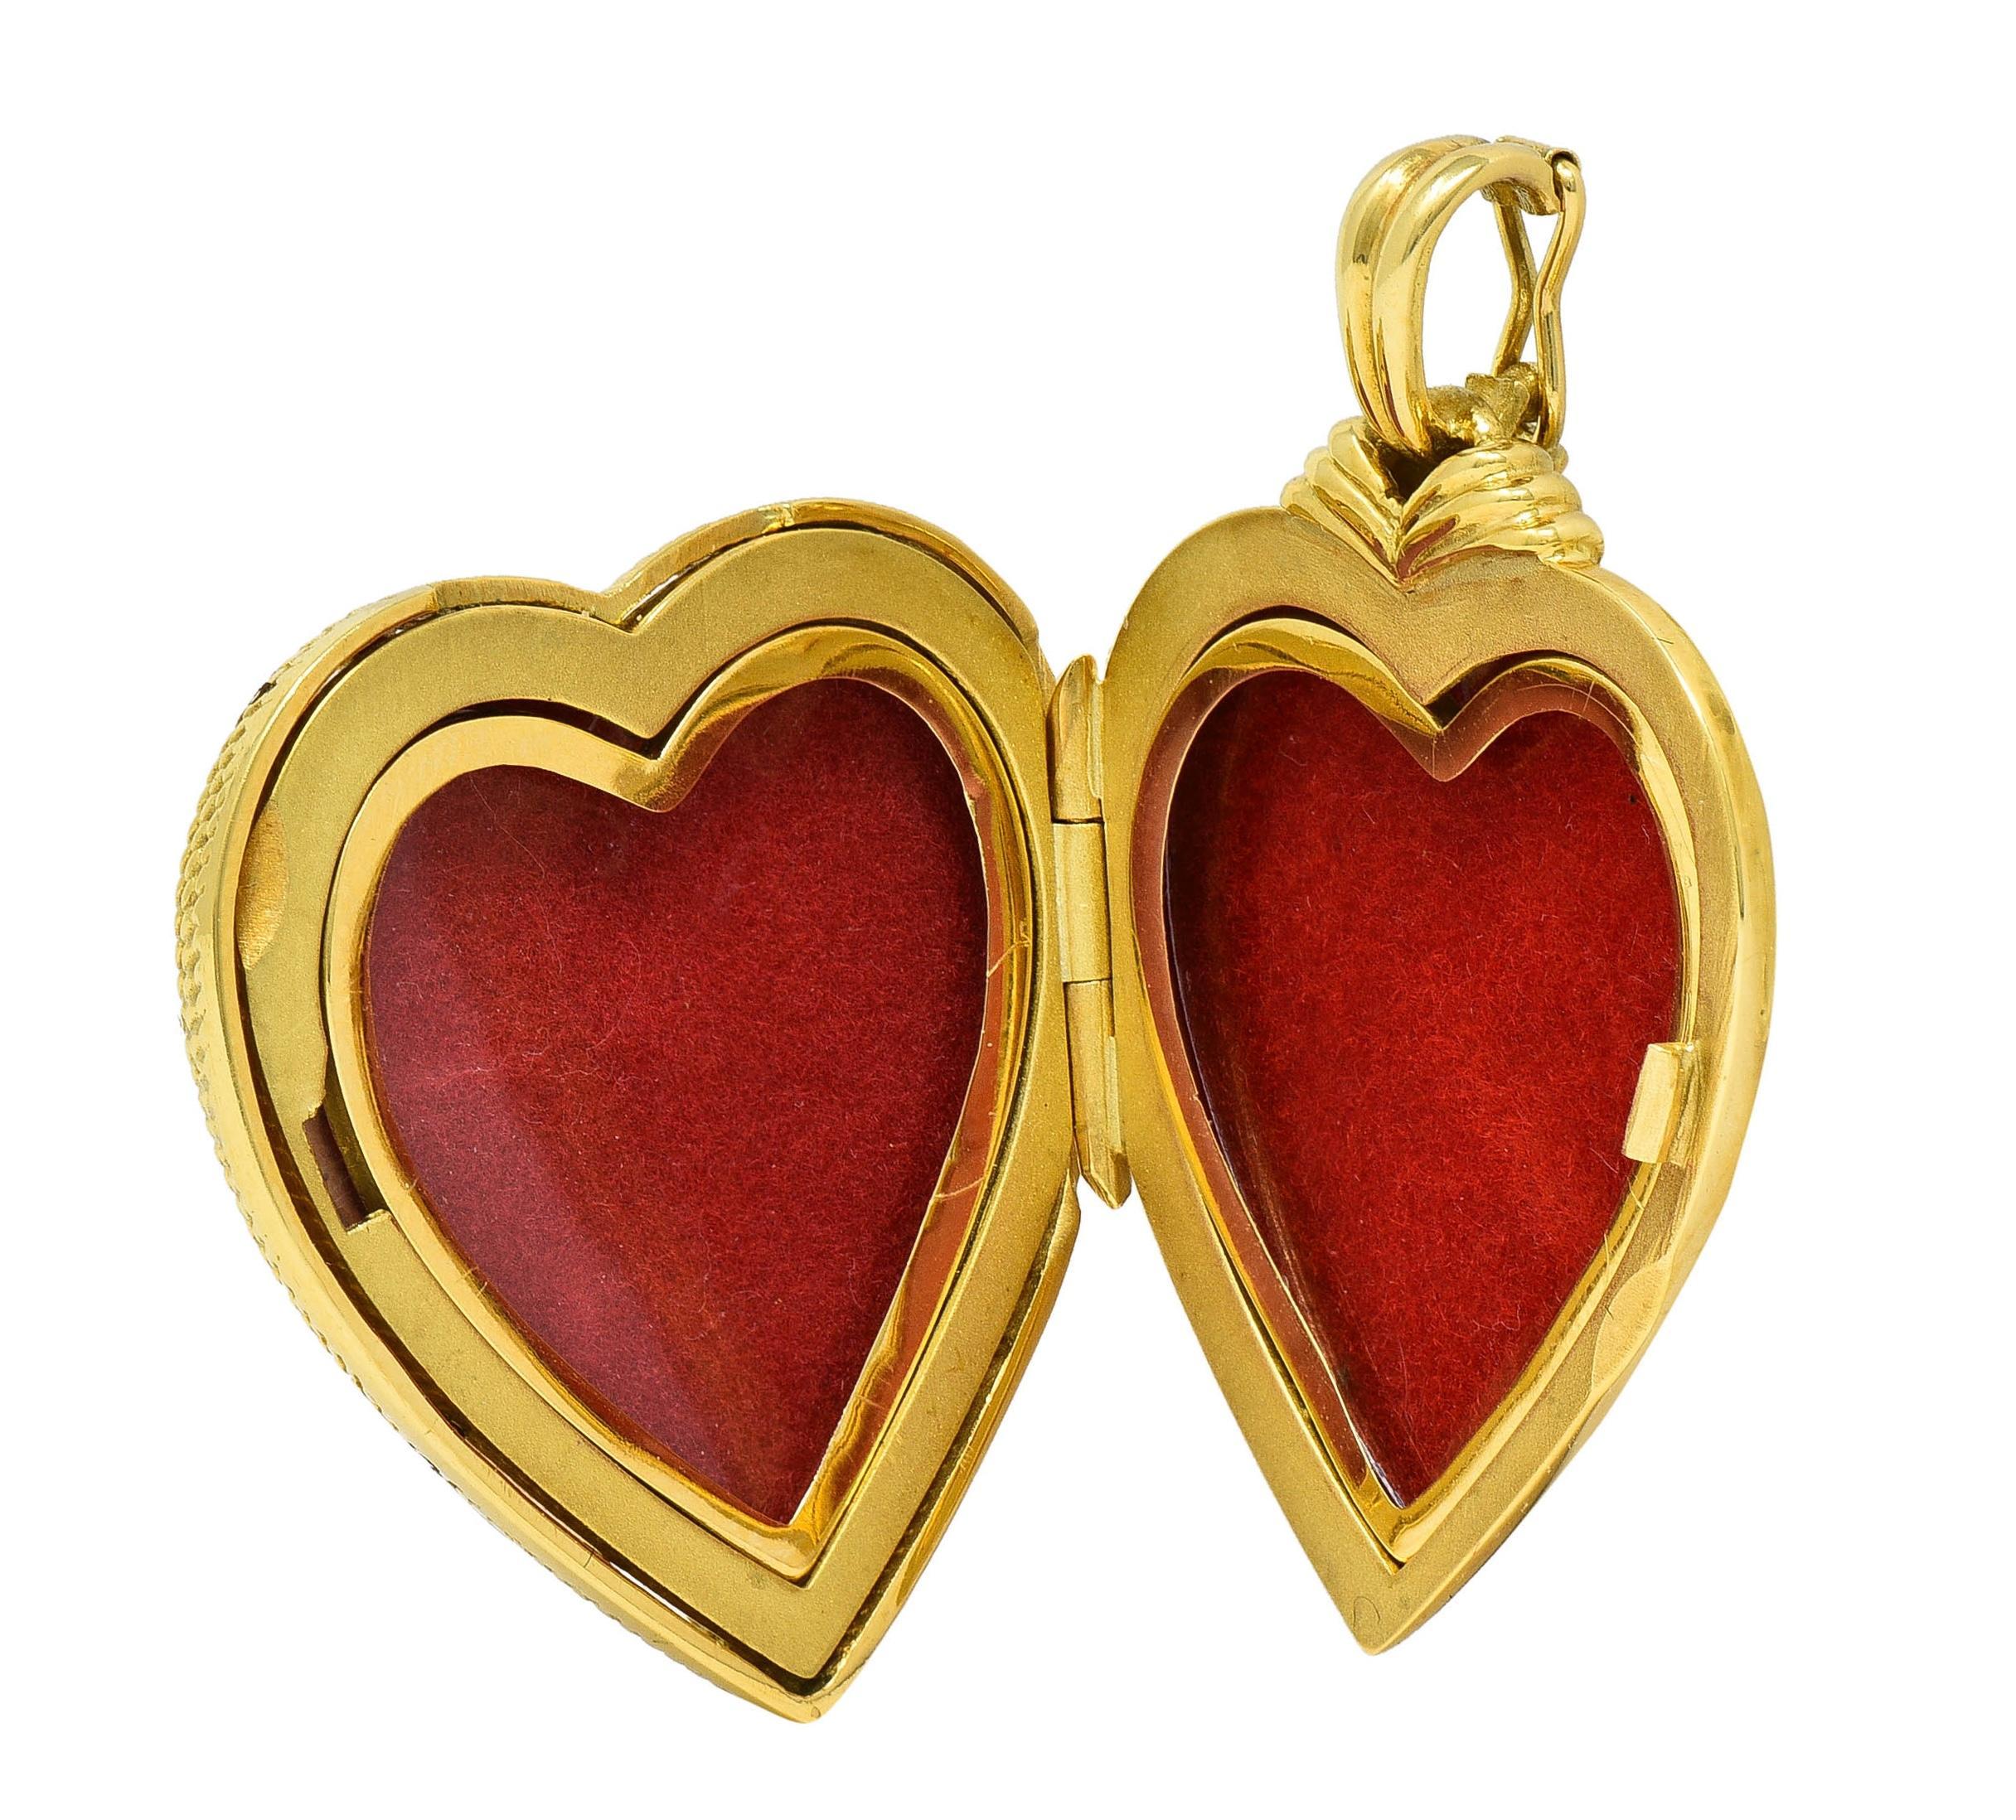 Designed as a heart-shaped locket form suspended from grooved enhancer bale
Featuring a basse-taille style enamel face with orangey pink enamel
Transparent and glossed over an engraved wave pattern
With a gold, net-like twisted rope motif